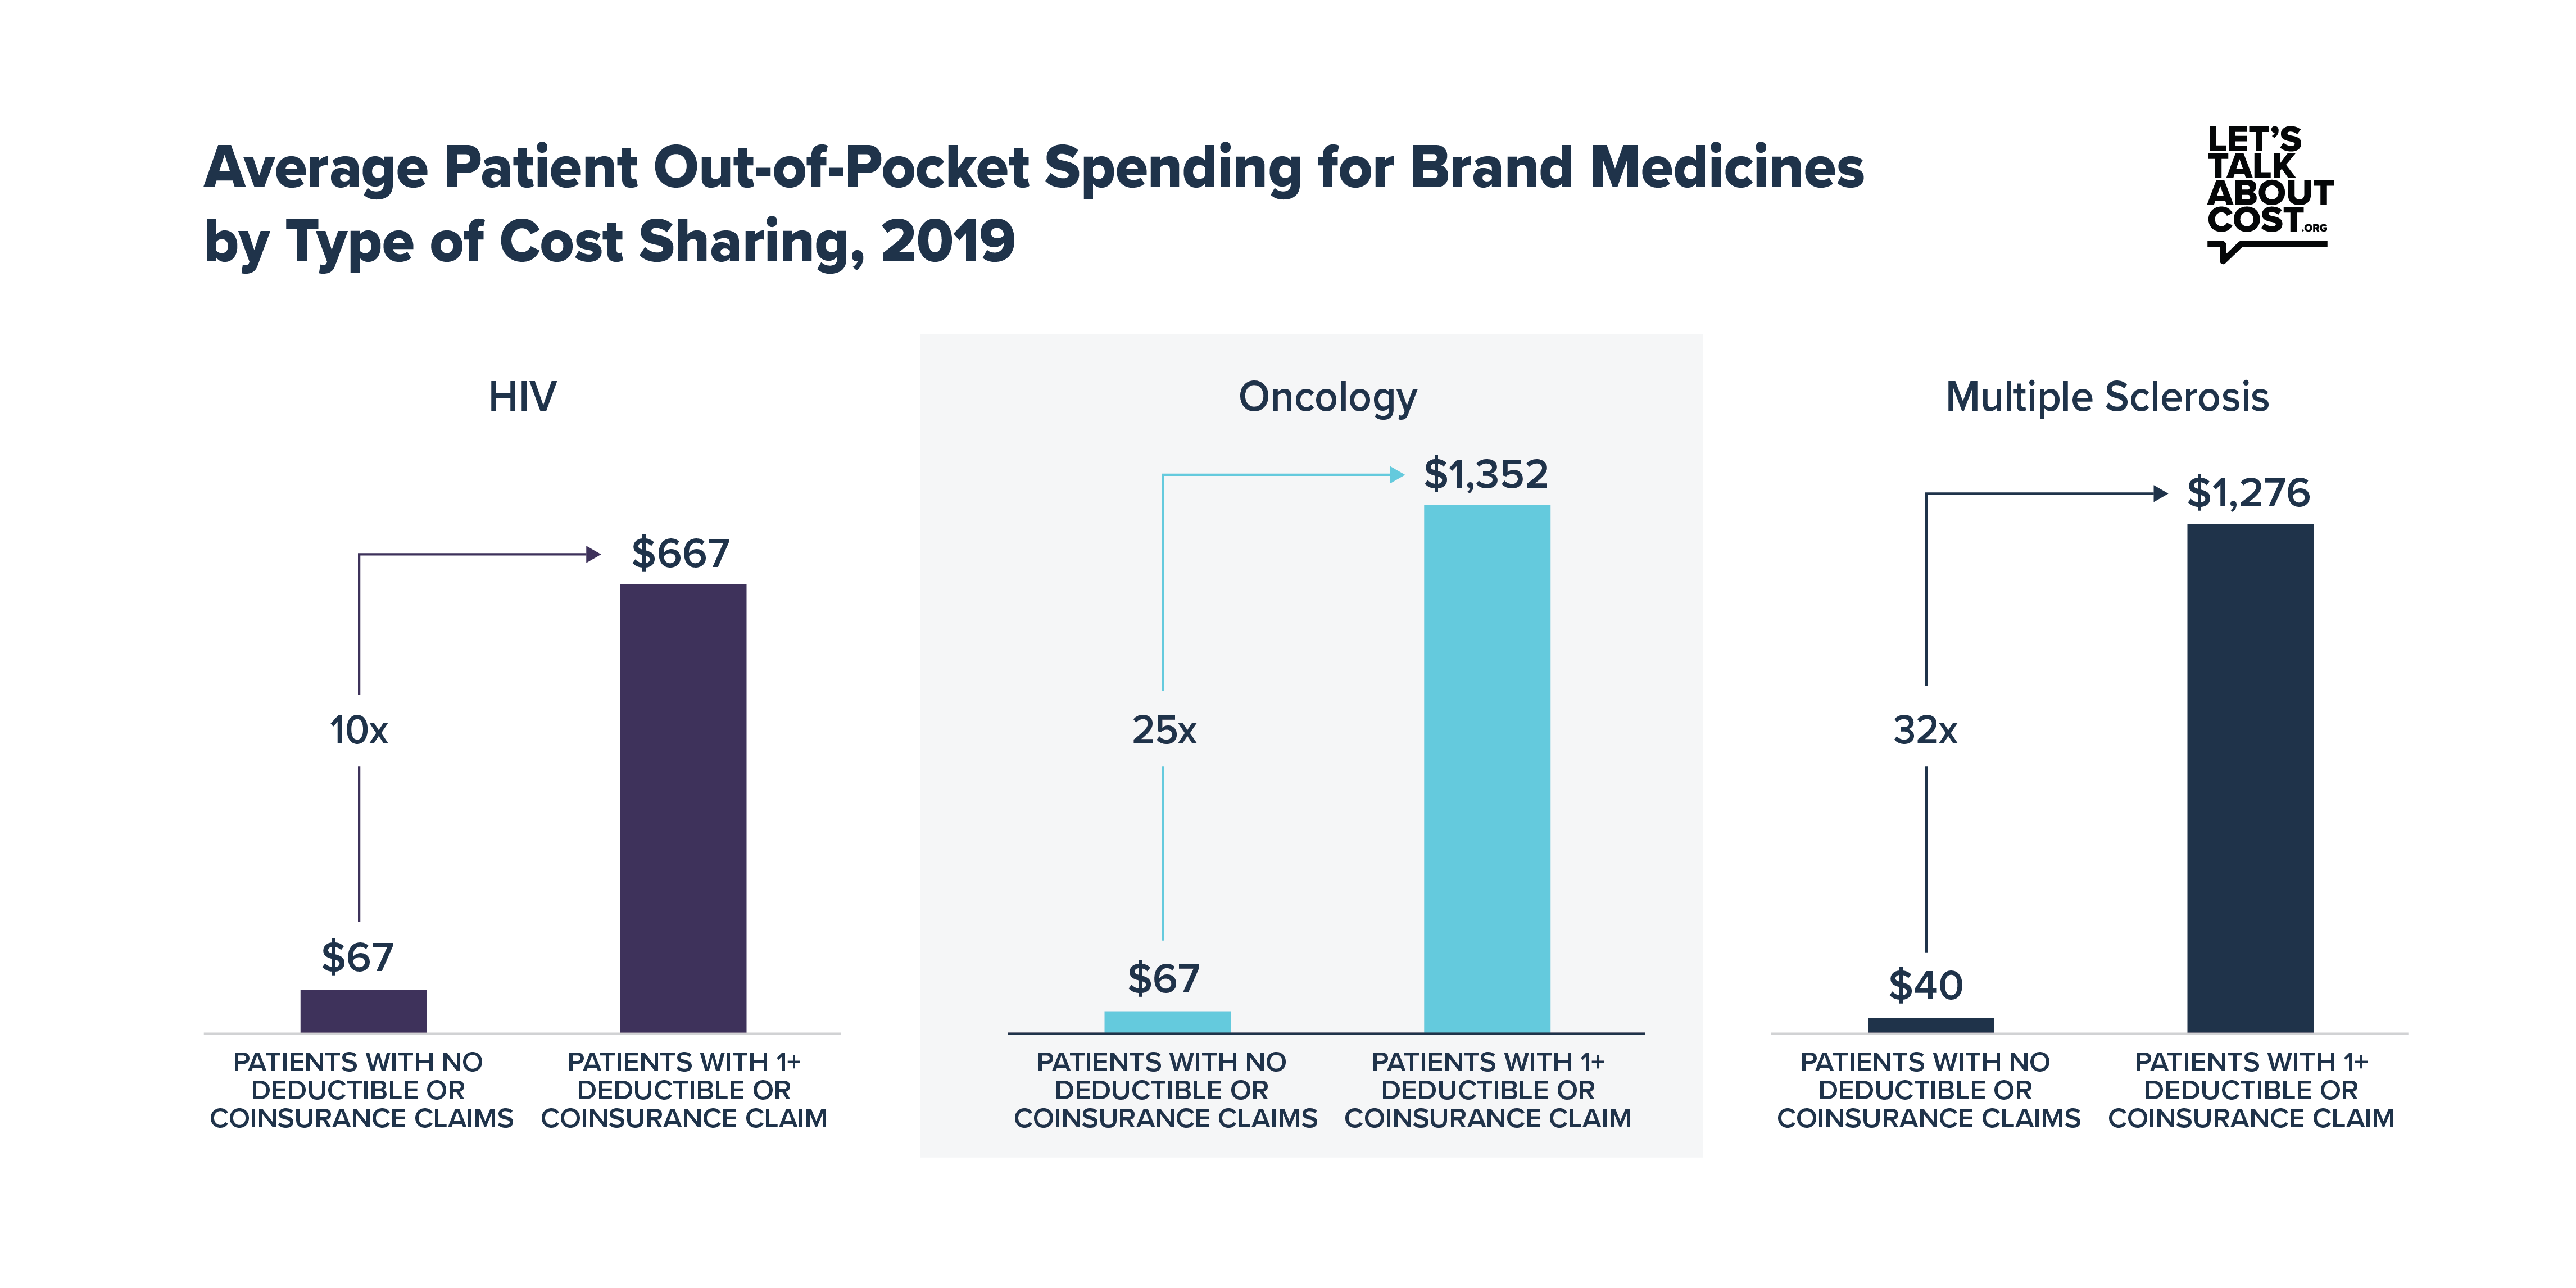 Average Patient out-of-pocket spedning for brand medicine by type of cost sharing 2019